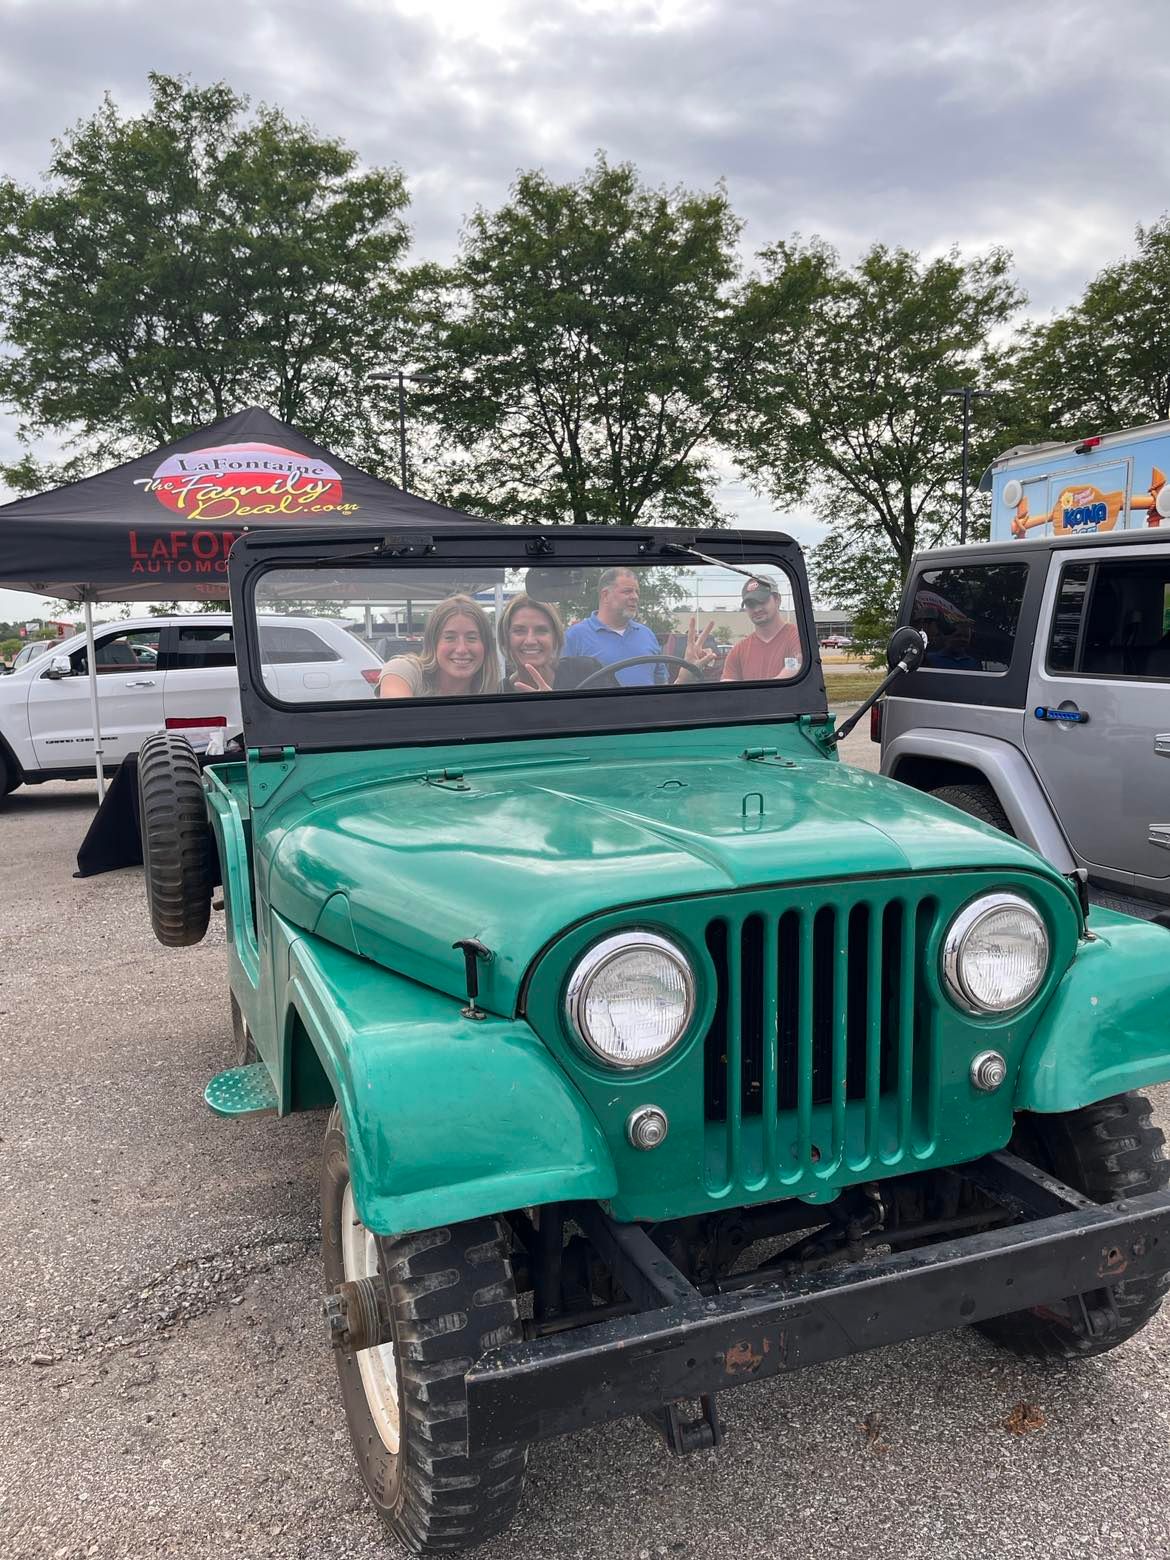 LaFontaine Lansing Jeep Meet and Greet